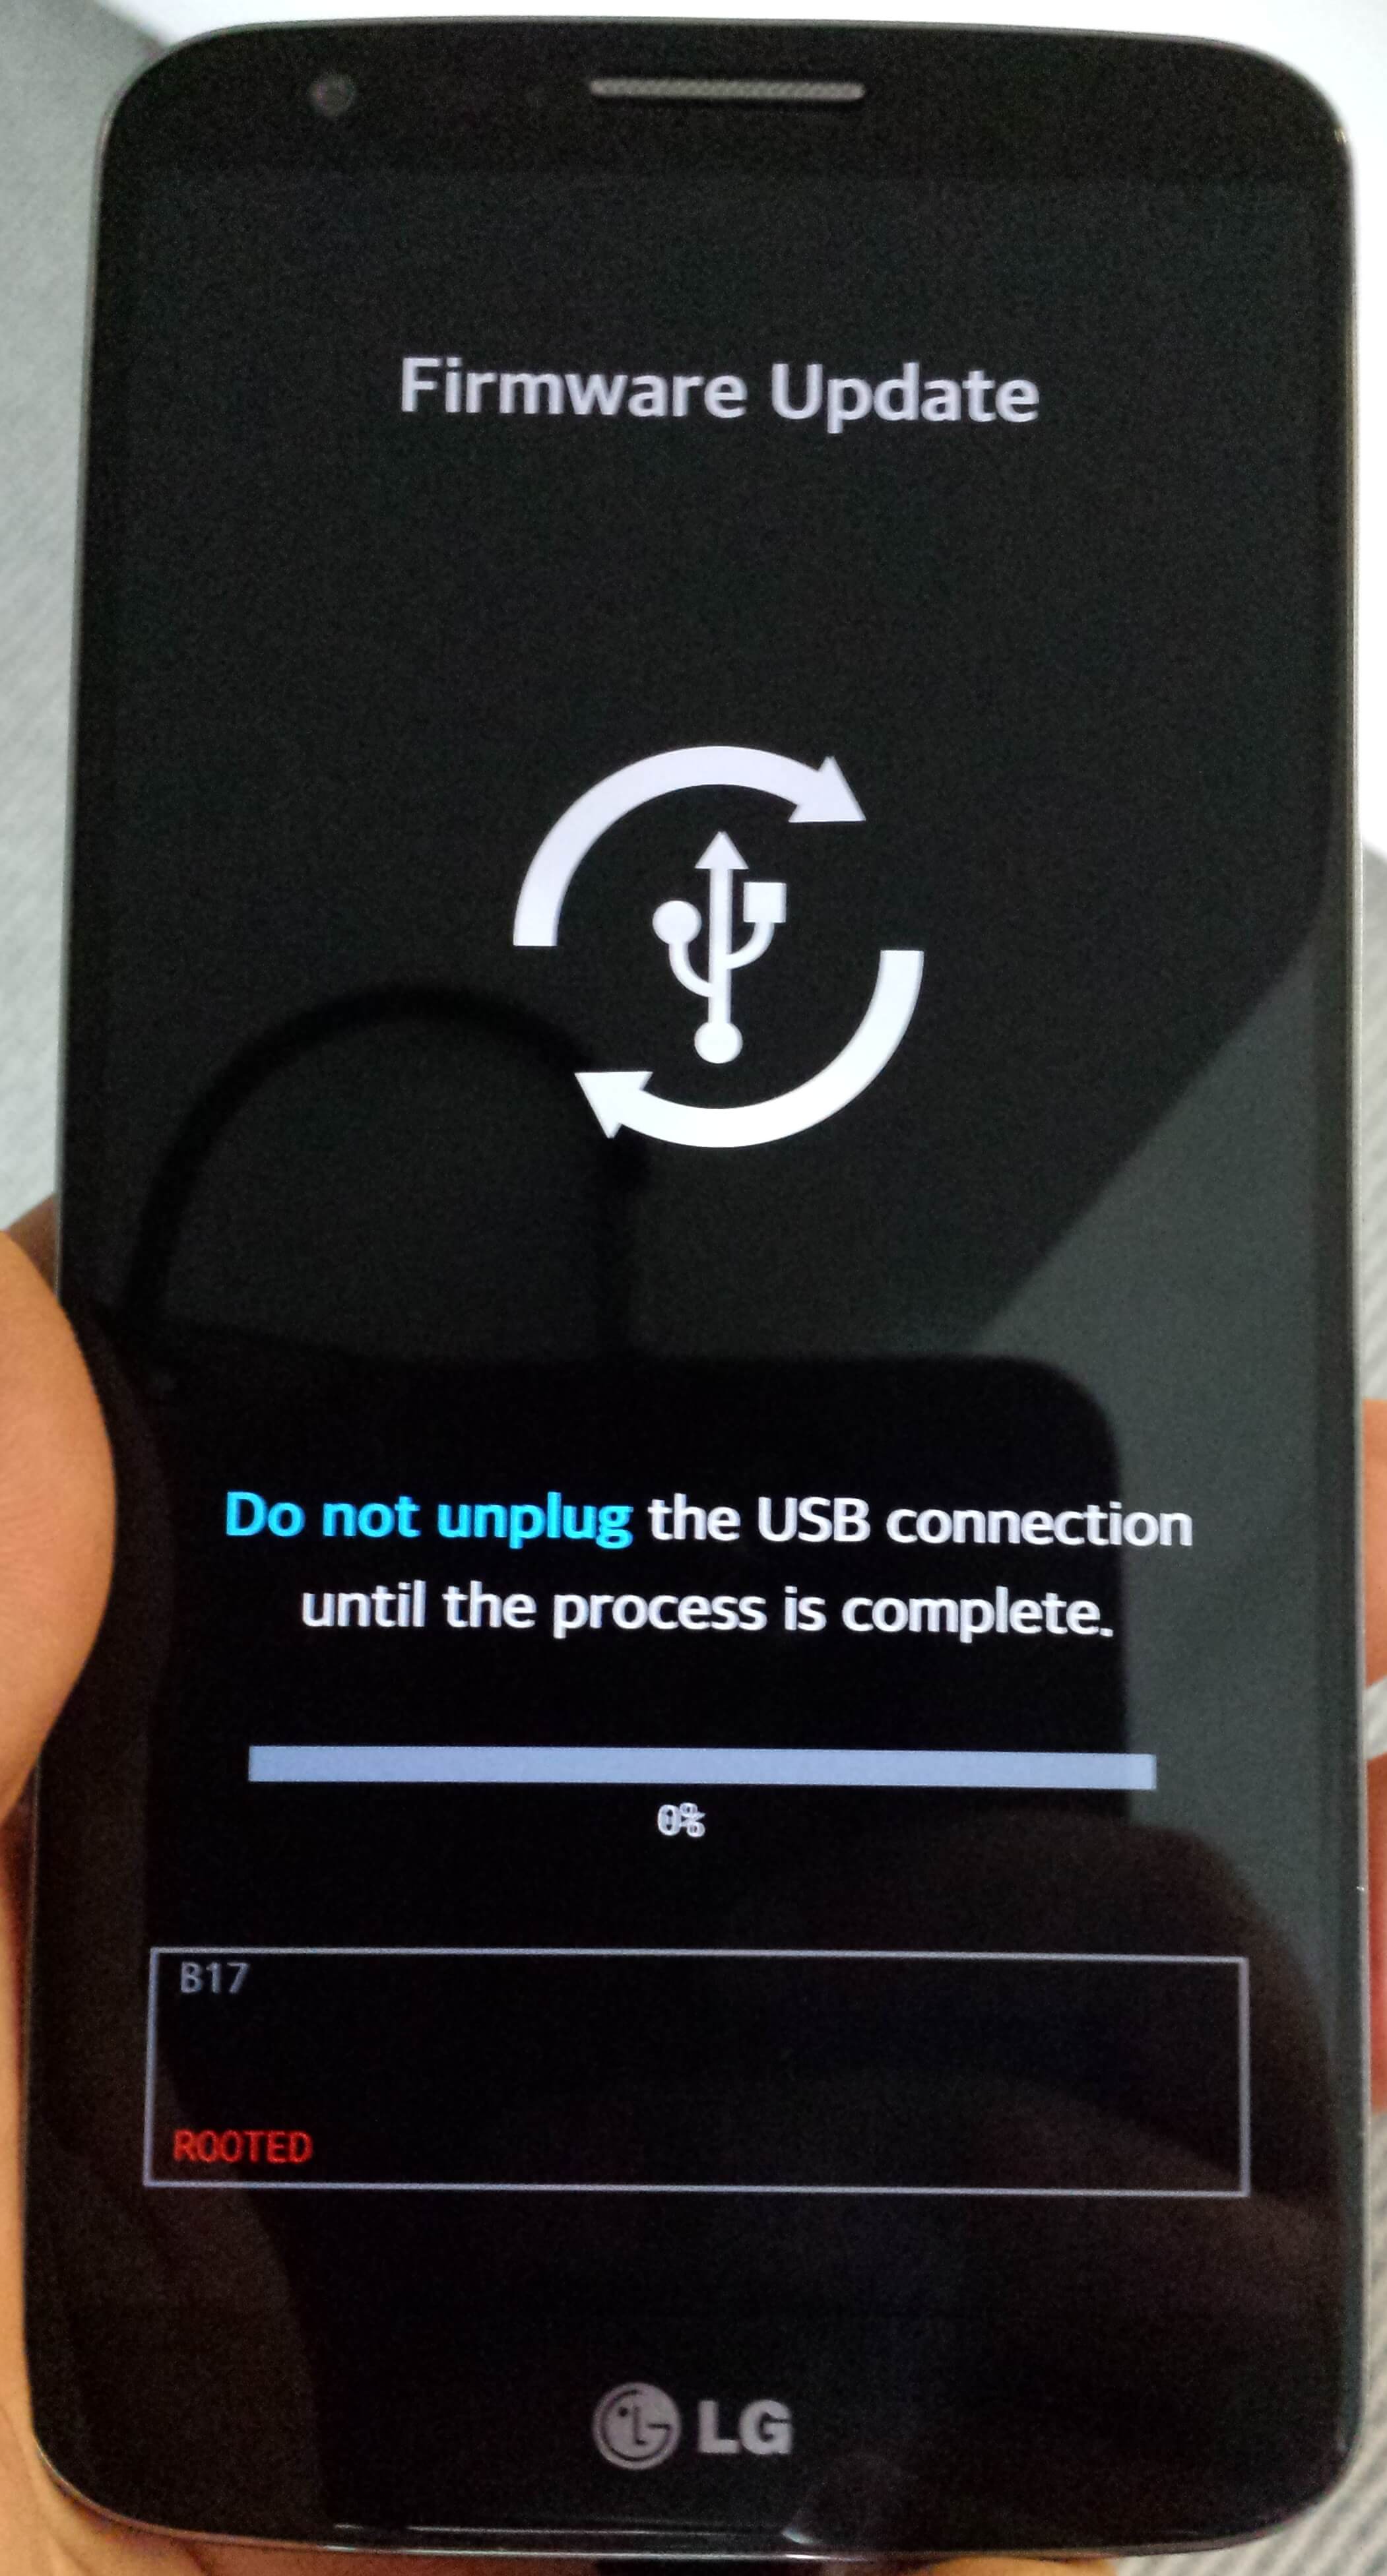 Lg Firmware Update Do Not Unplug The Usb Connection